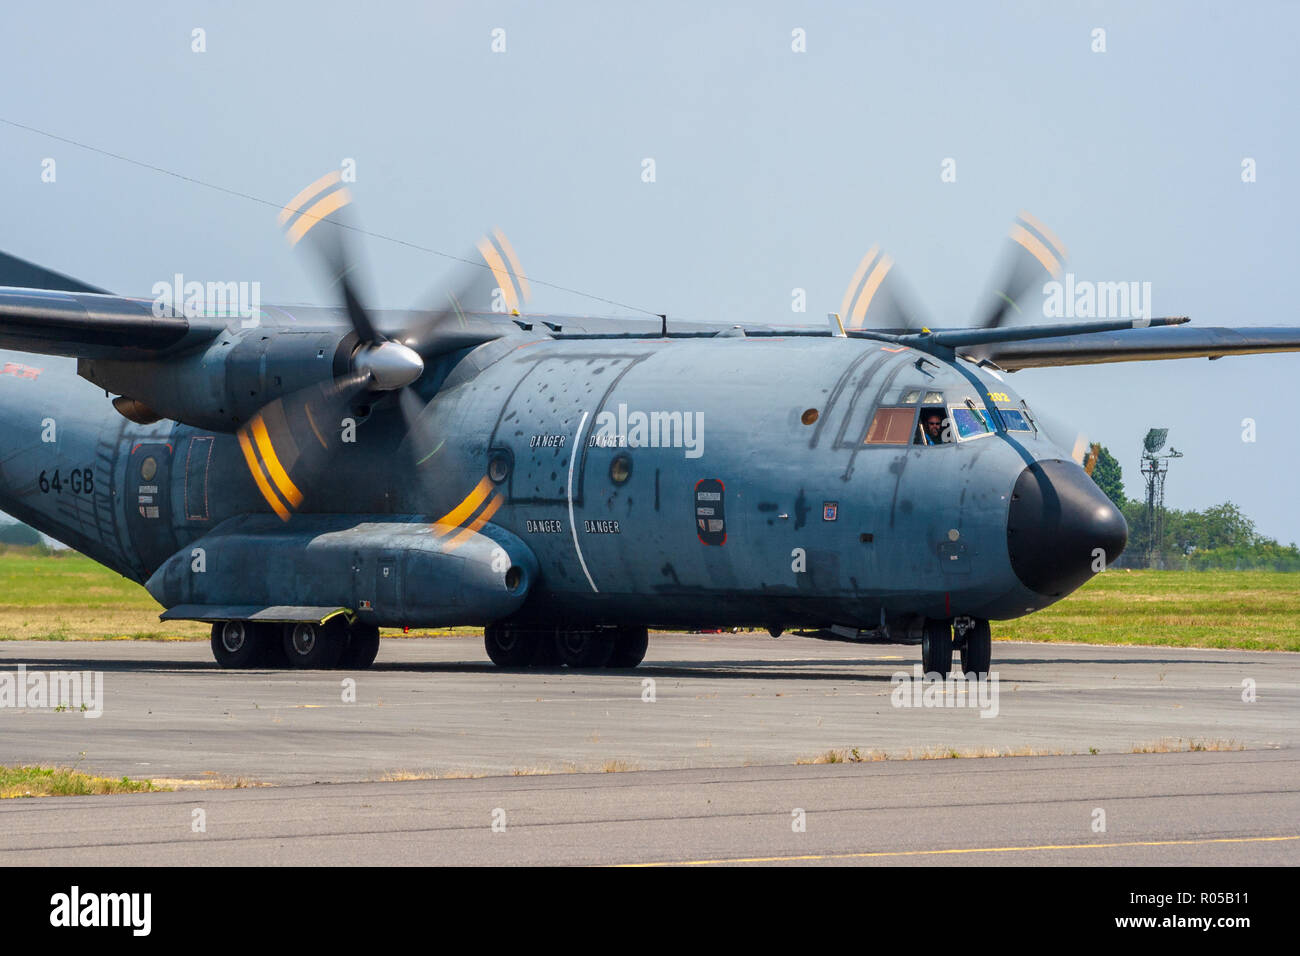 CAMBRAI, FRANCE - JUN 26, 2010: French Air Force C-160 Transall transport propellor plane taxiing on the taxiway of Cambrai airbase. Stock Photo